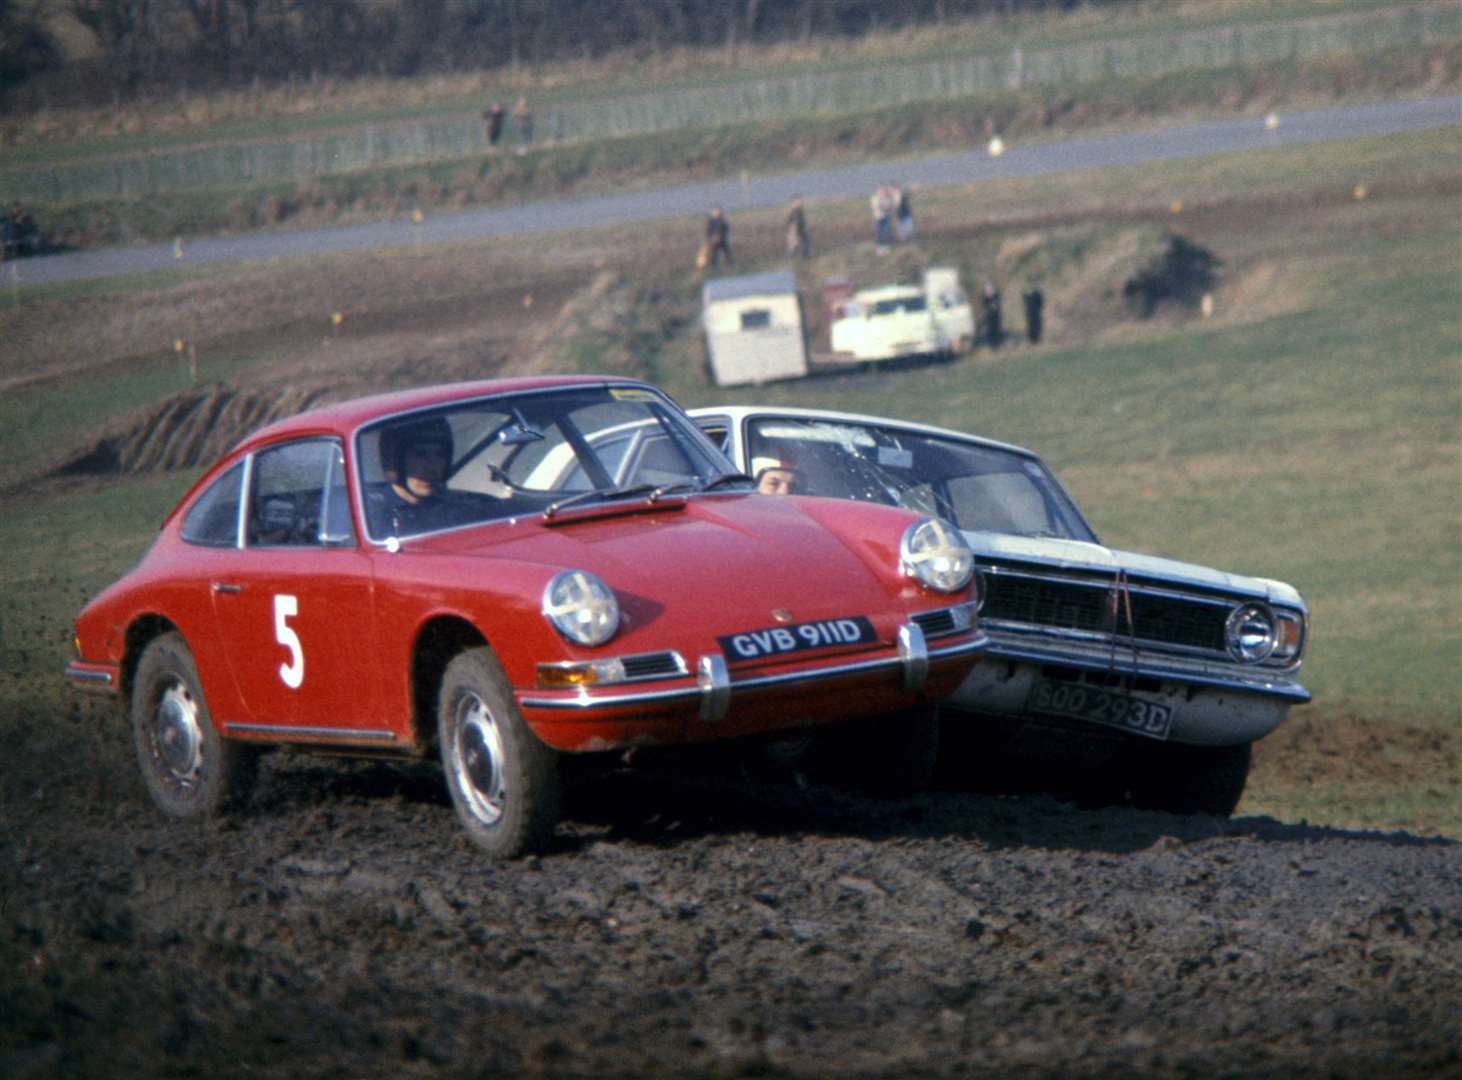 Porsche driver Vic Elford won the first-ever rallycross event at Lydden Hill in 1967. Picture: LAT